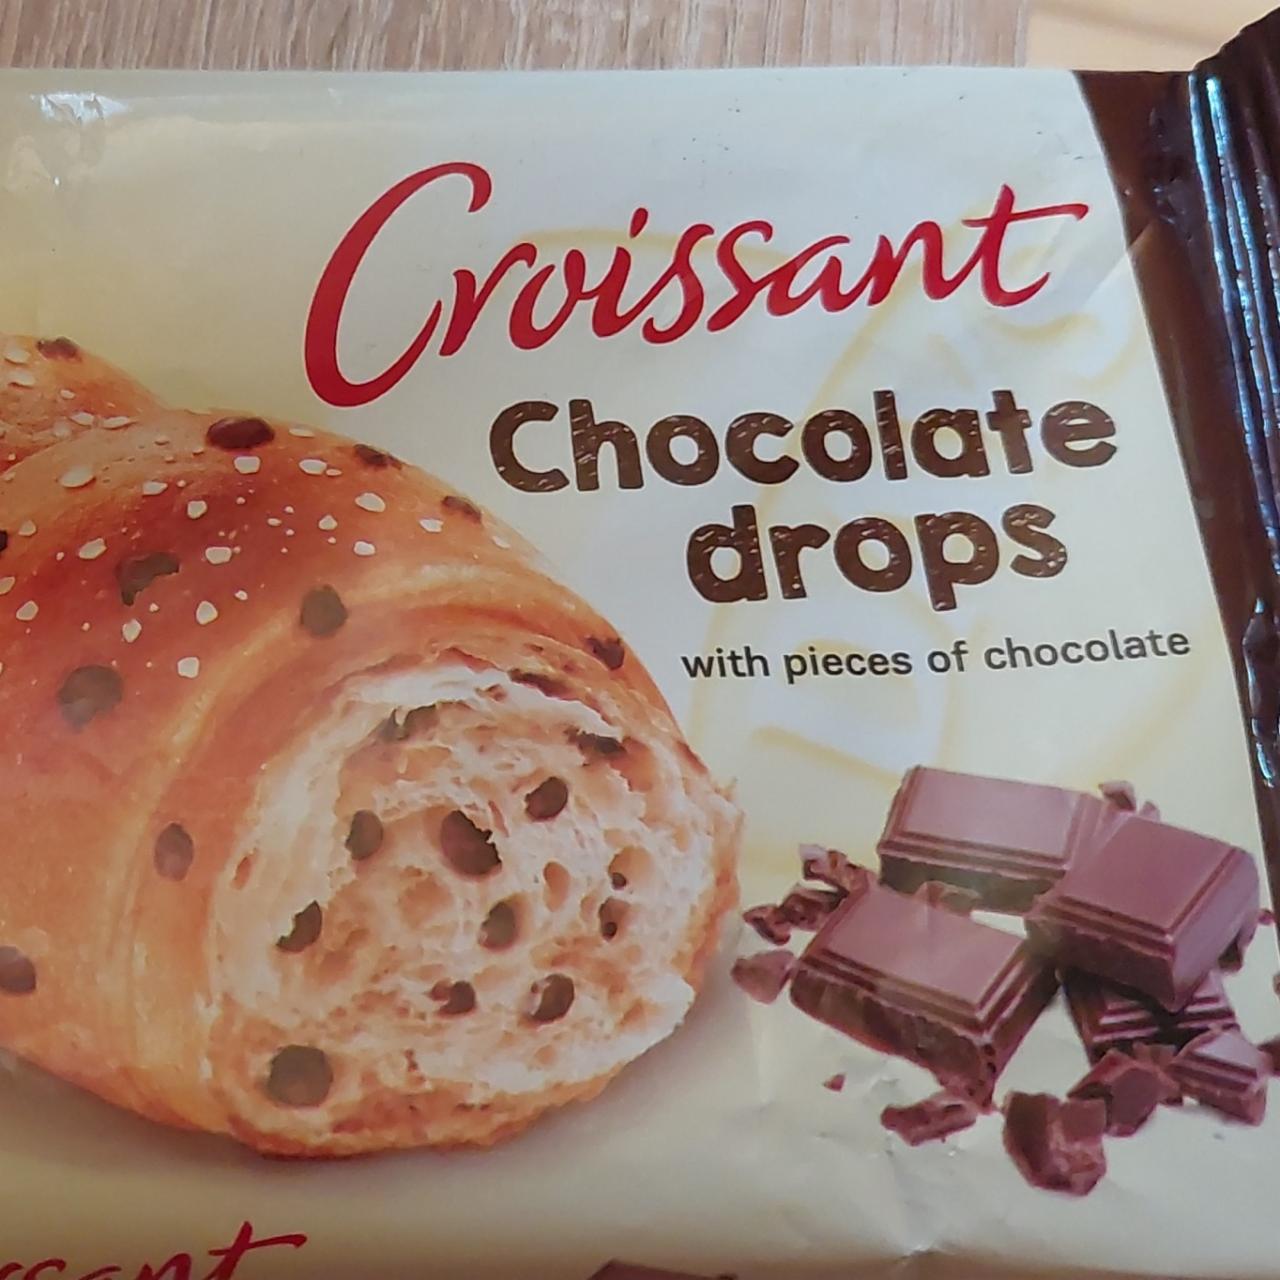 Fotografie - Croissant Chocolate drops with pieces of chocolate 7days